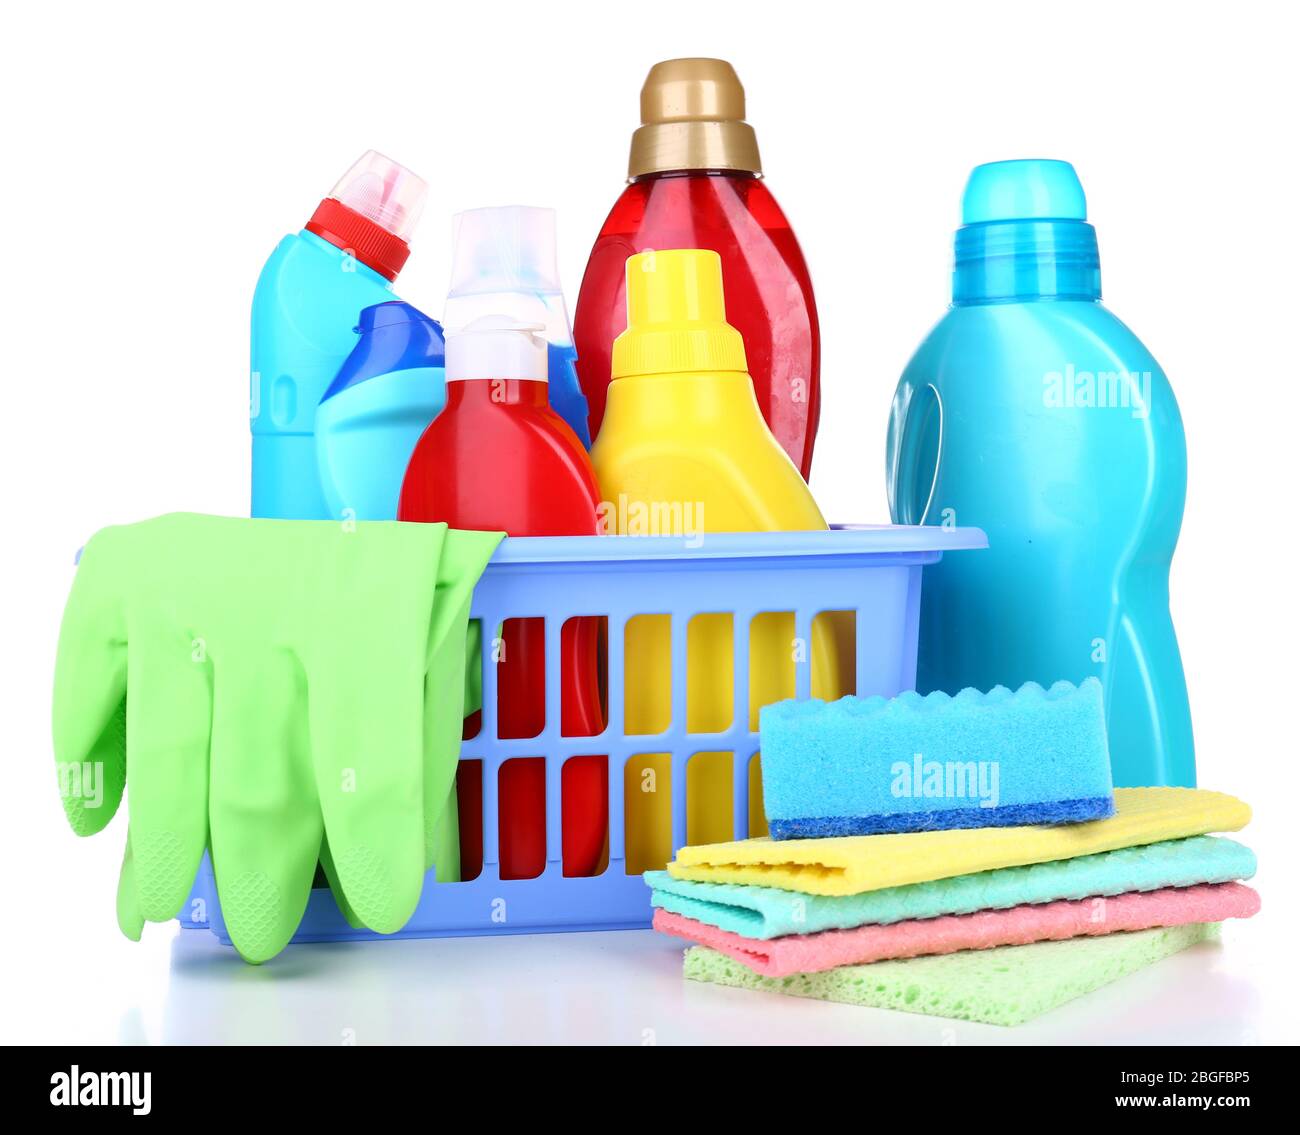 https://c8.alamy.com/comp/2BGFBP5/cleaning-products-isolated-on-white-2BGFBP5.jpg